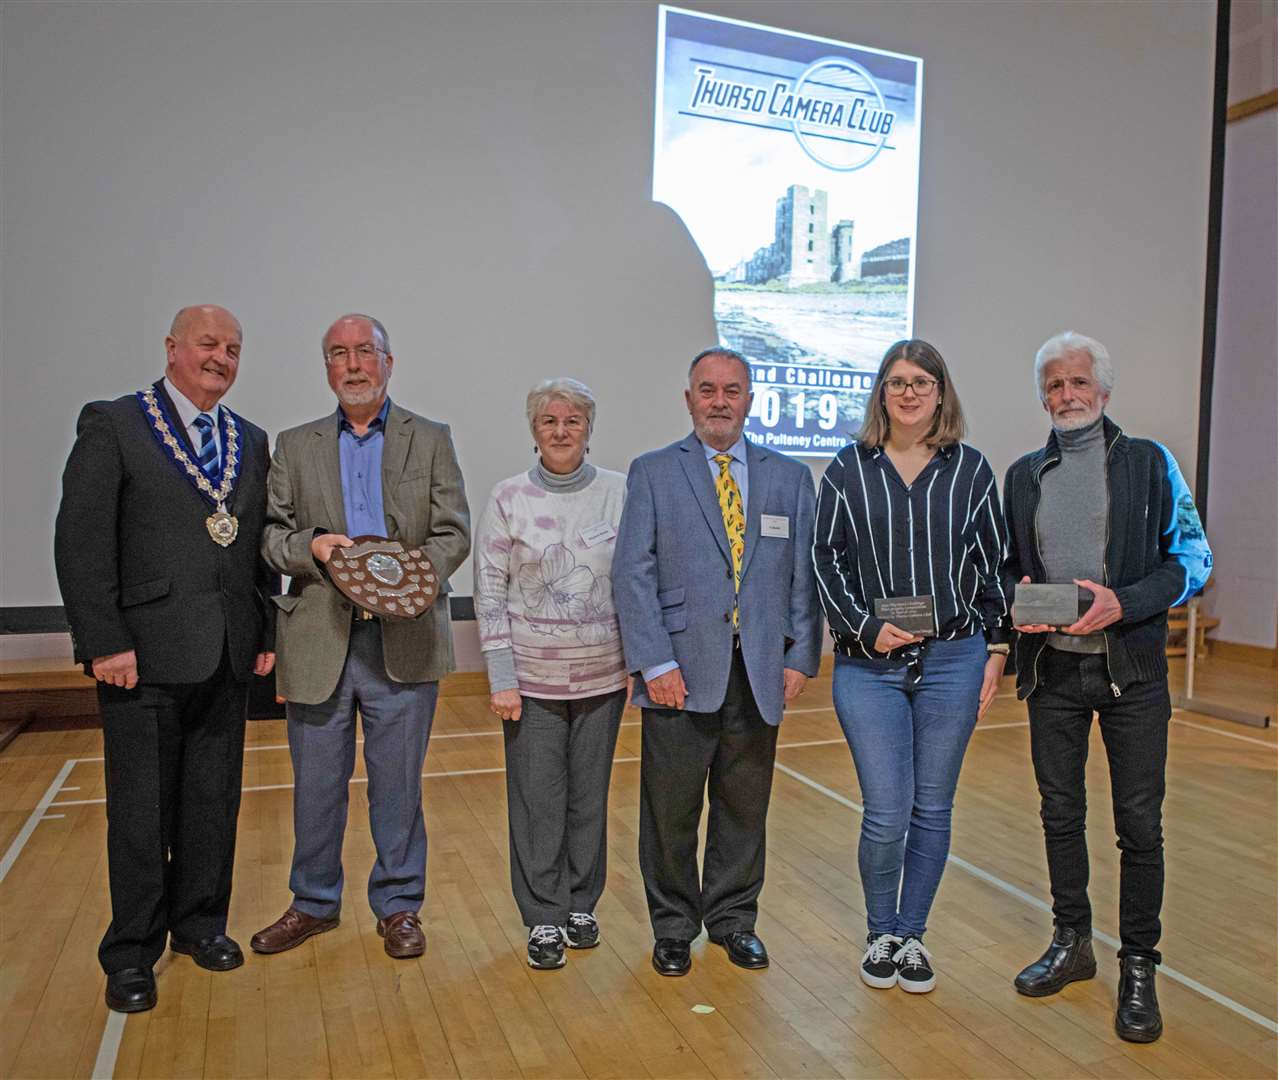 The winner of the Highland inter-club challenge, Phil Downie of Dingwall, and the individual class winners alongside the judge Al Buntin (centre), his wife Marjorie, who presented the prizes, and Caithness civic leader Willie Mackay, who presented his donated trophy to the winner of the best overall image.